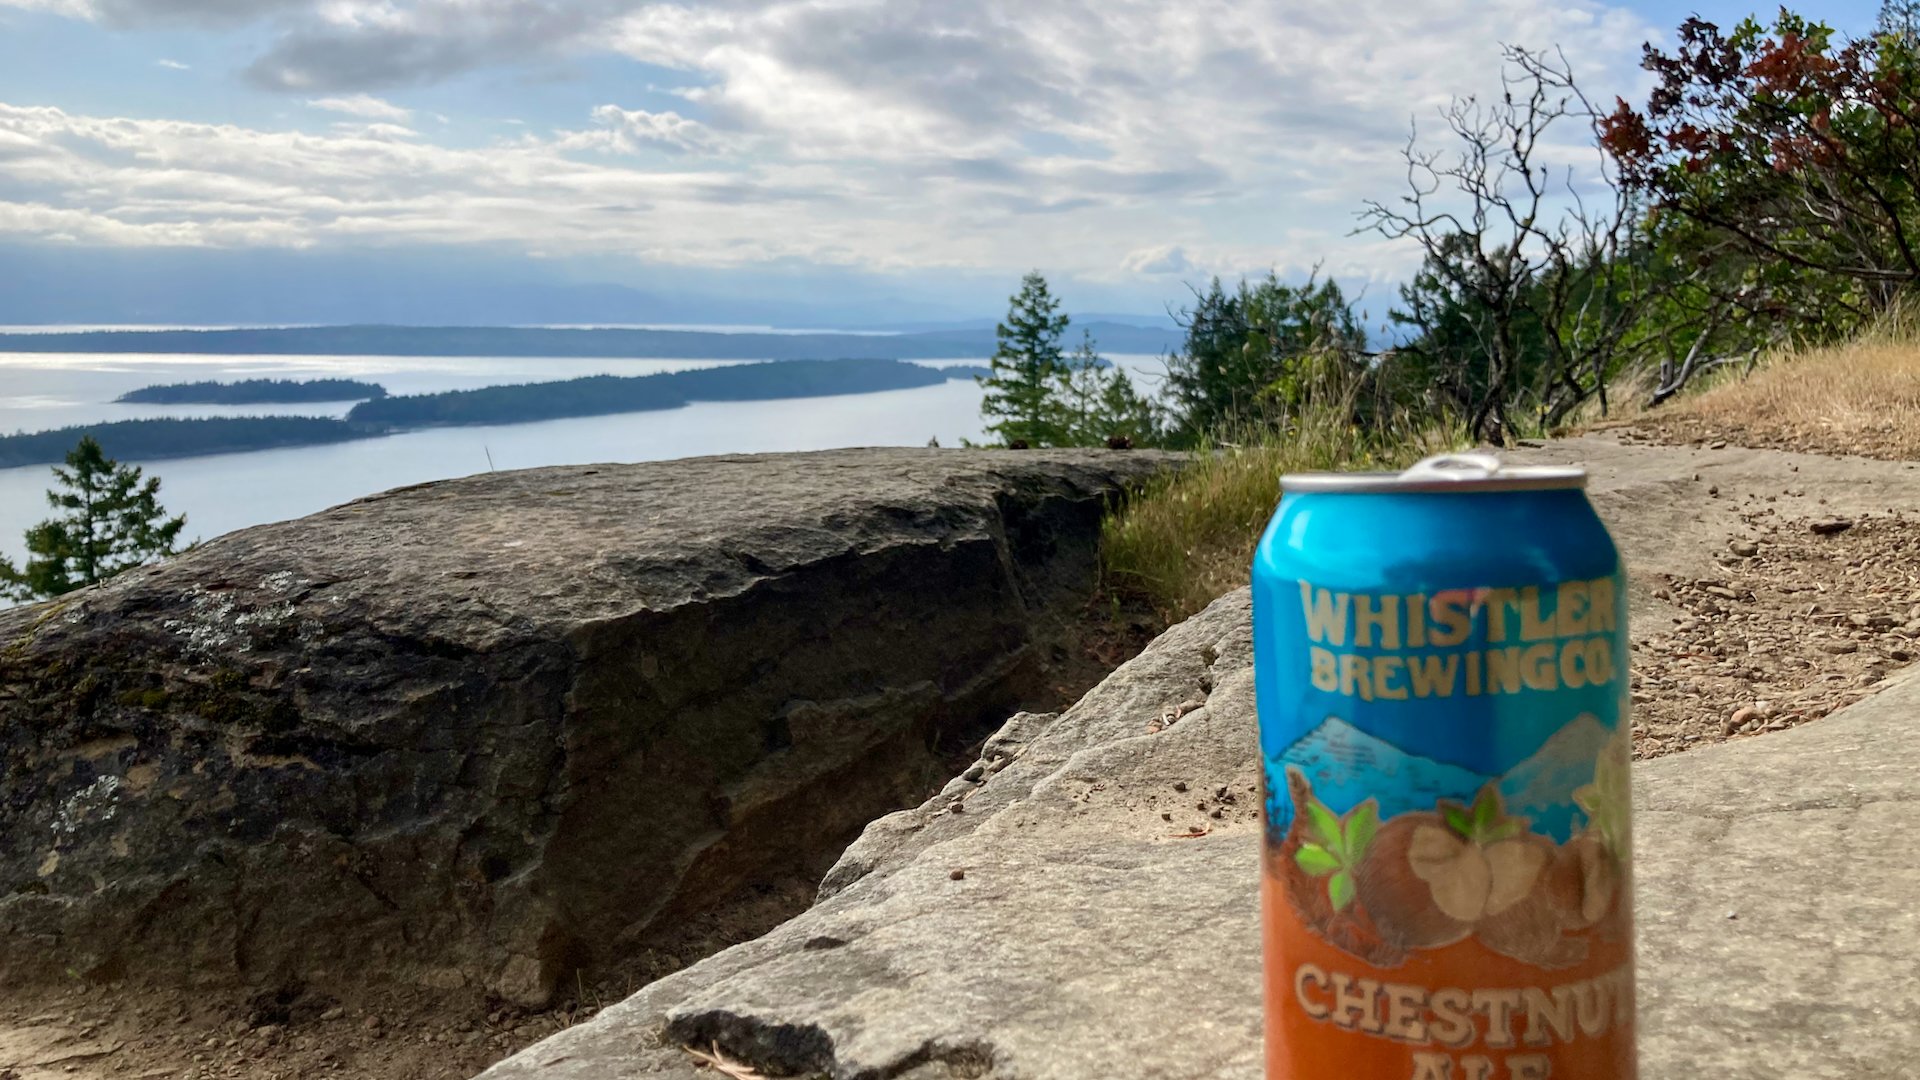  It wasn’t a long hike, but we still earned the beer! 